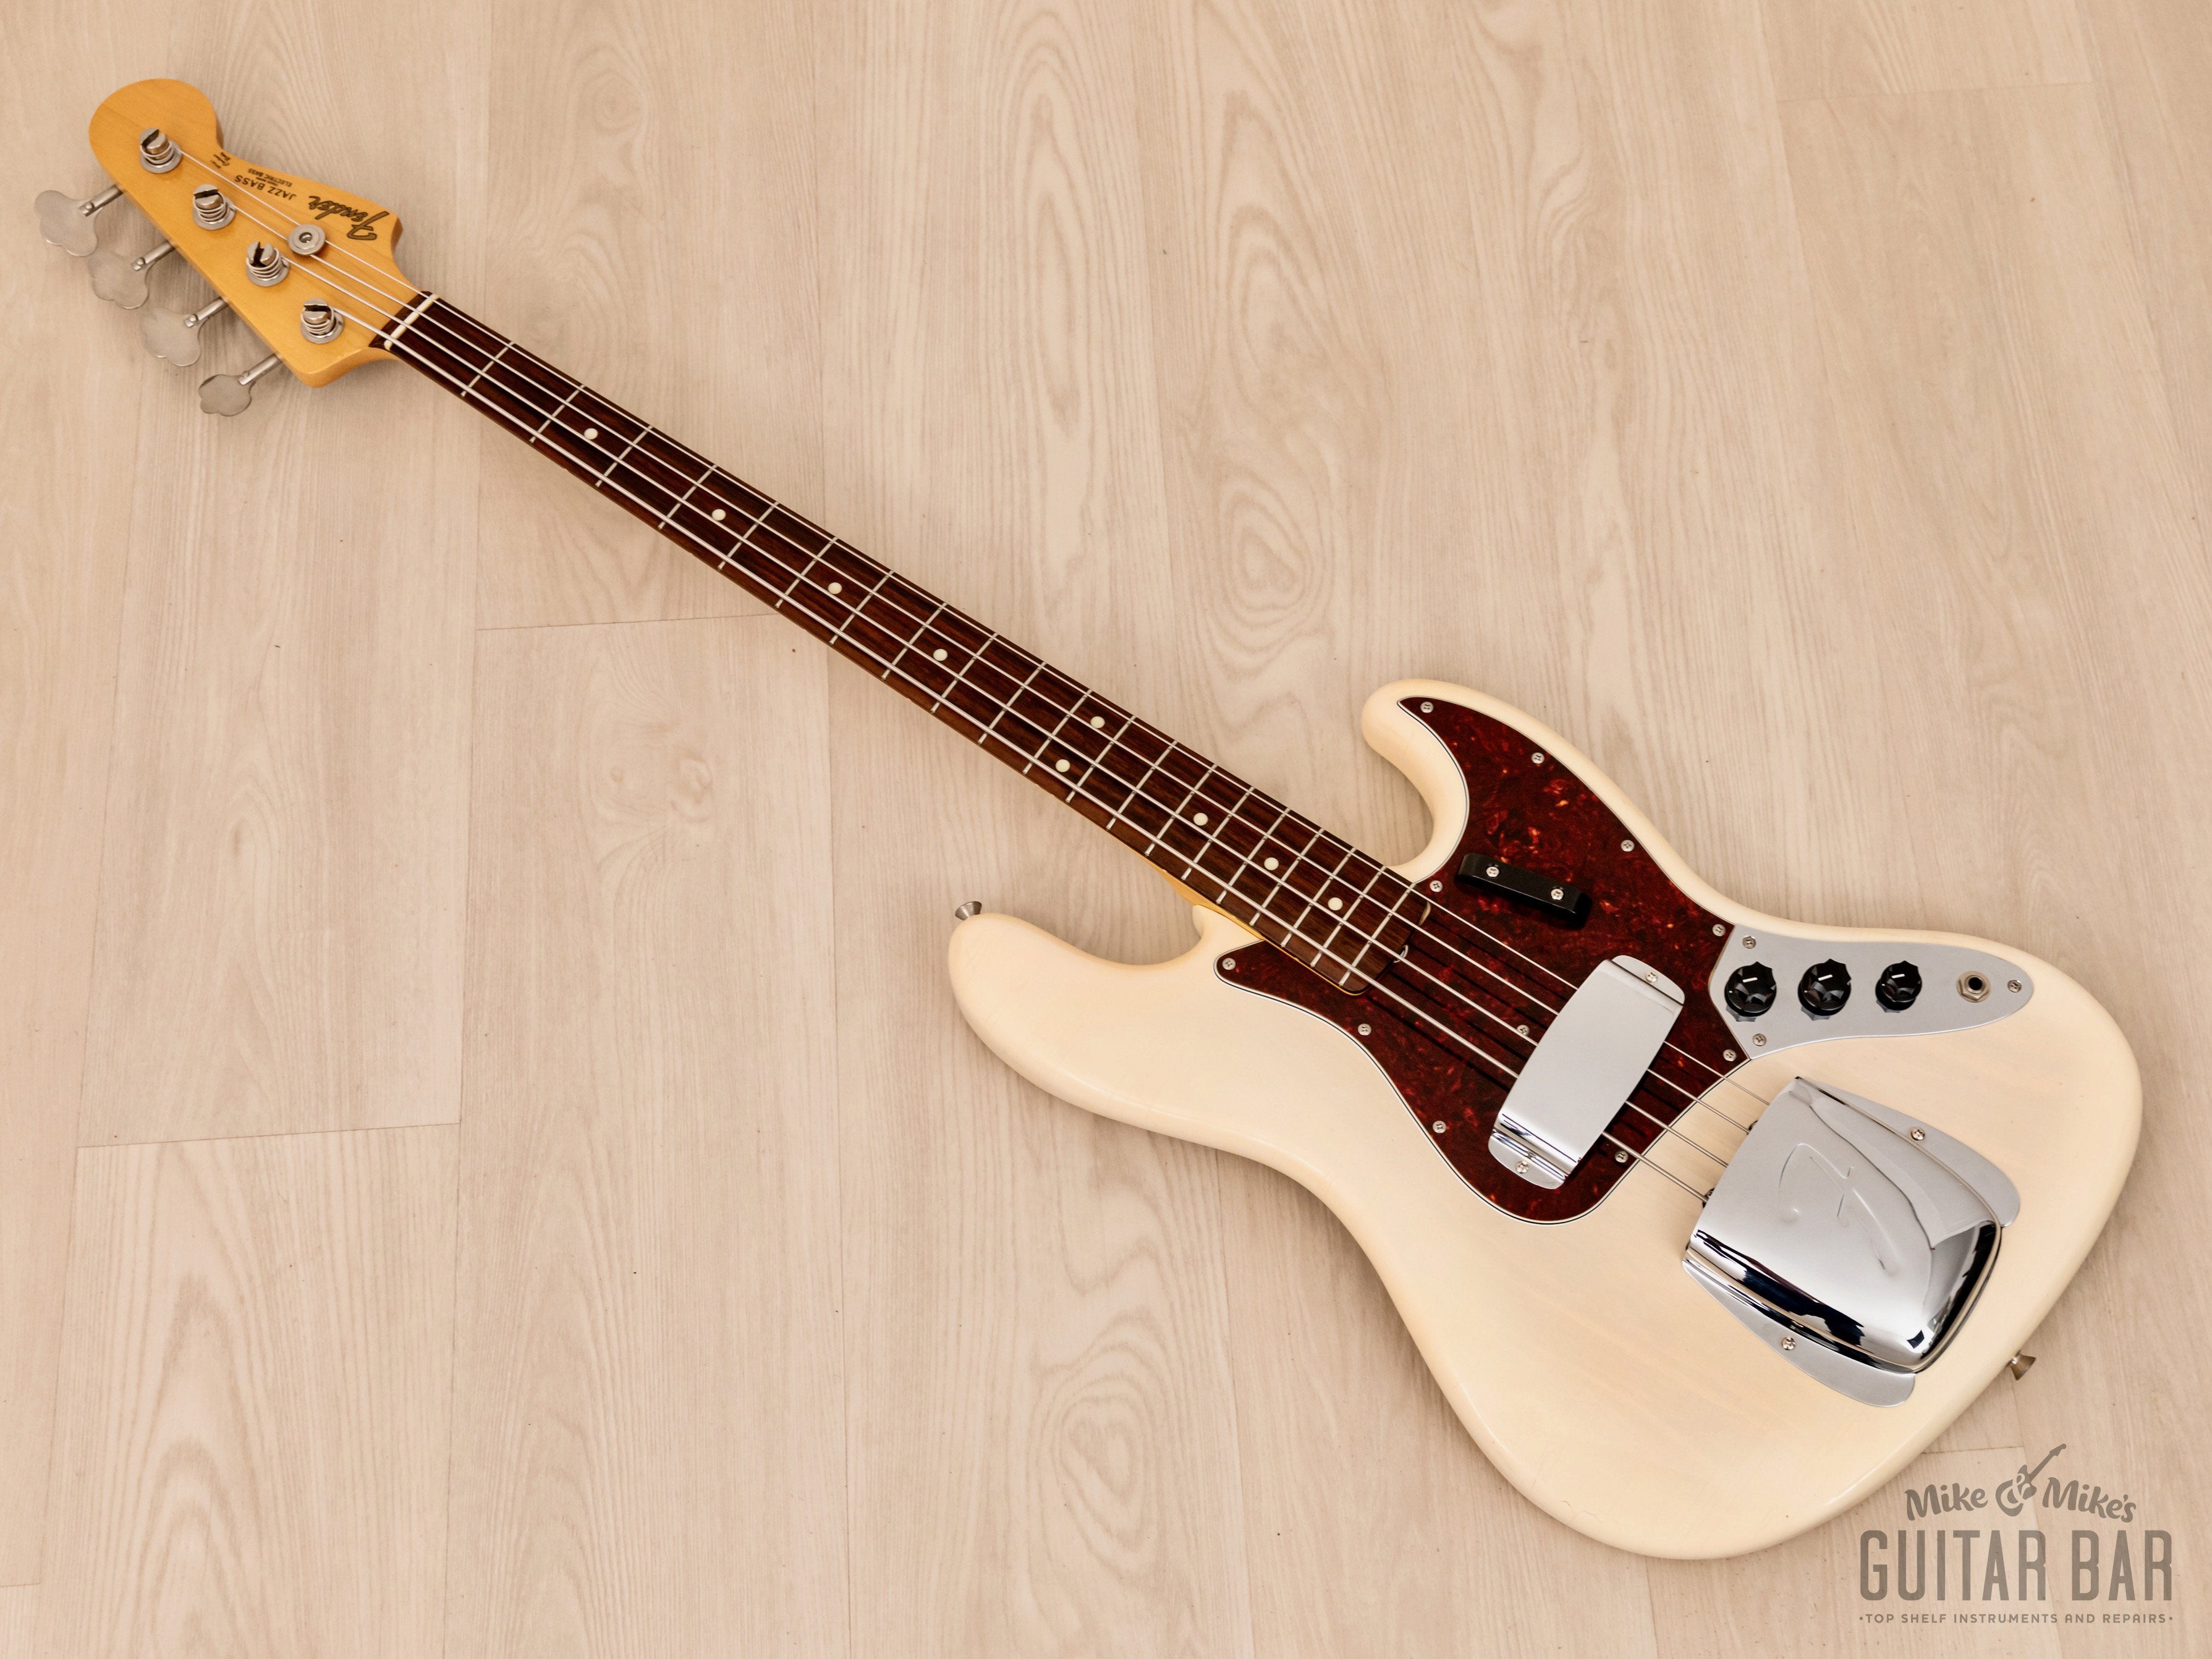 1989 Fender ExTrad '62 Jazz Bass JB62-128 Blonde Lacquer by Eric Daw w/ USA Pickups & Case, Japan MIJ